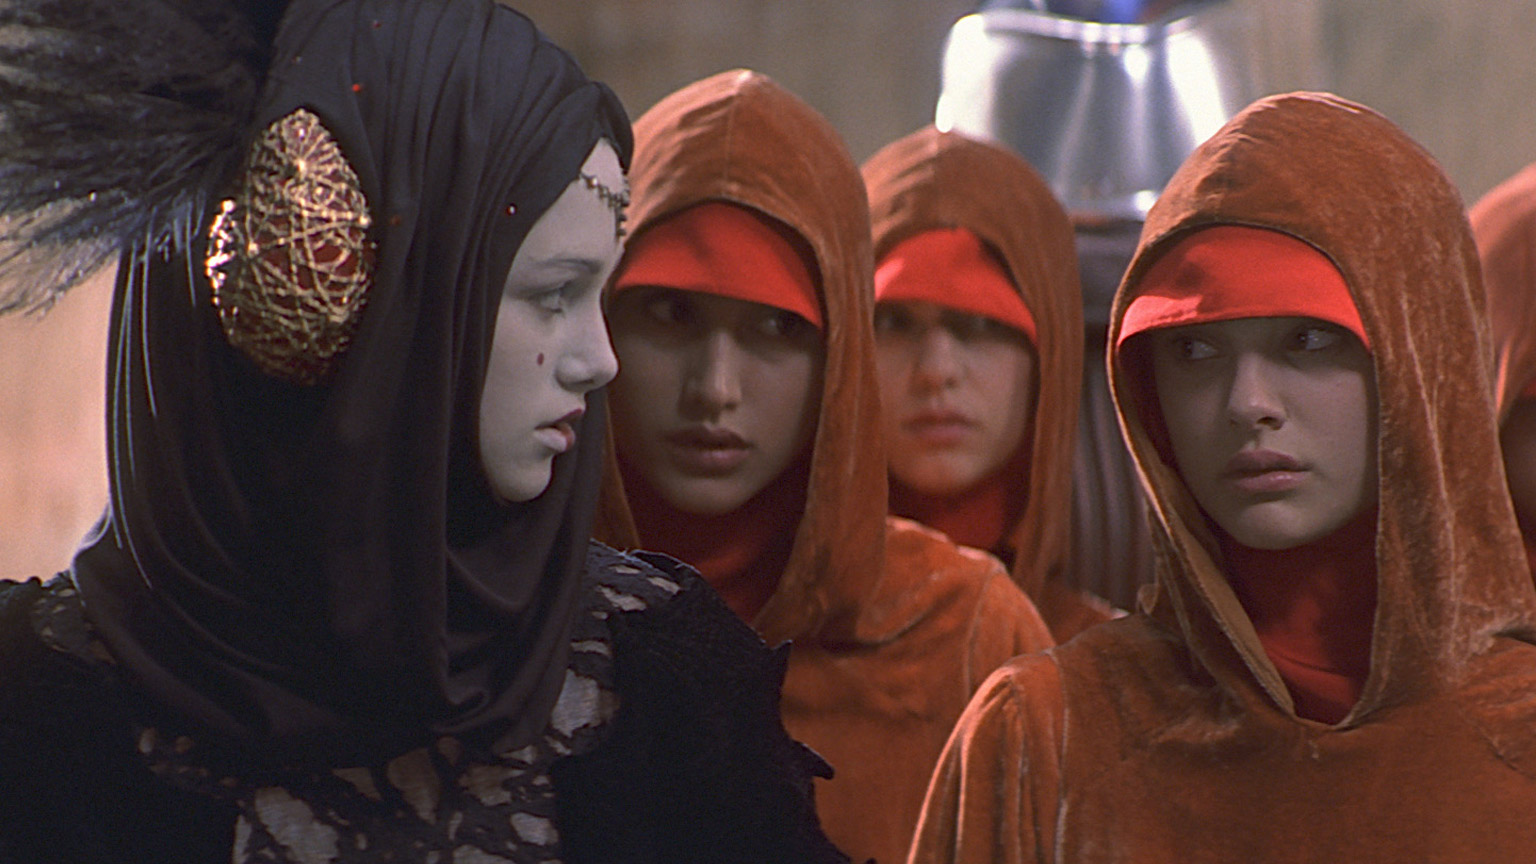 One of the handmaidens pictured here is Sofia Coppola, can you guess you? Seriously, I could use a hand. (Image: Disney)